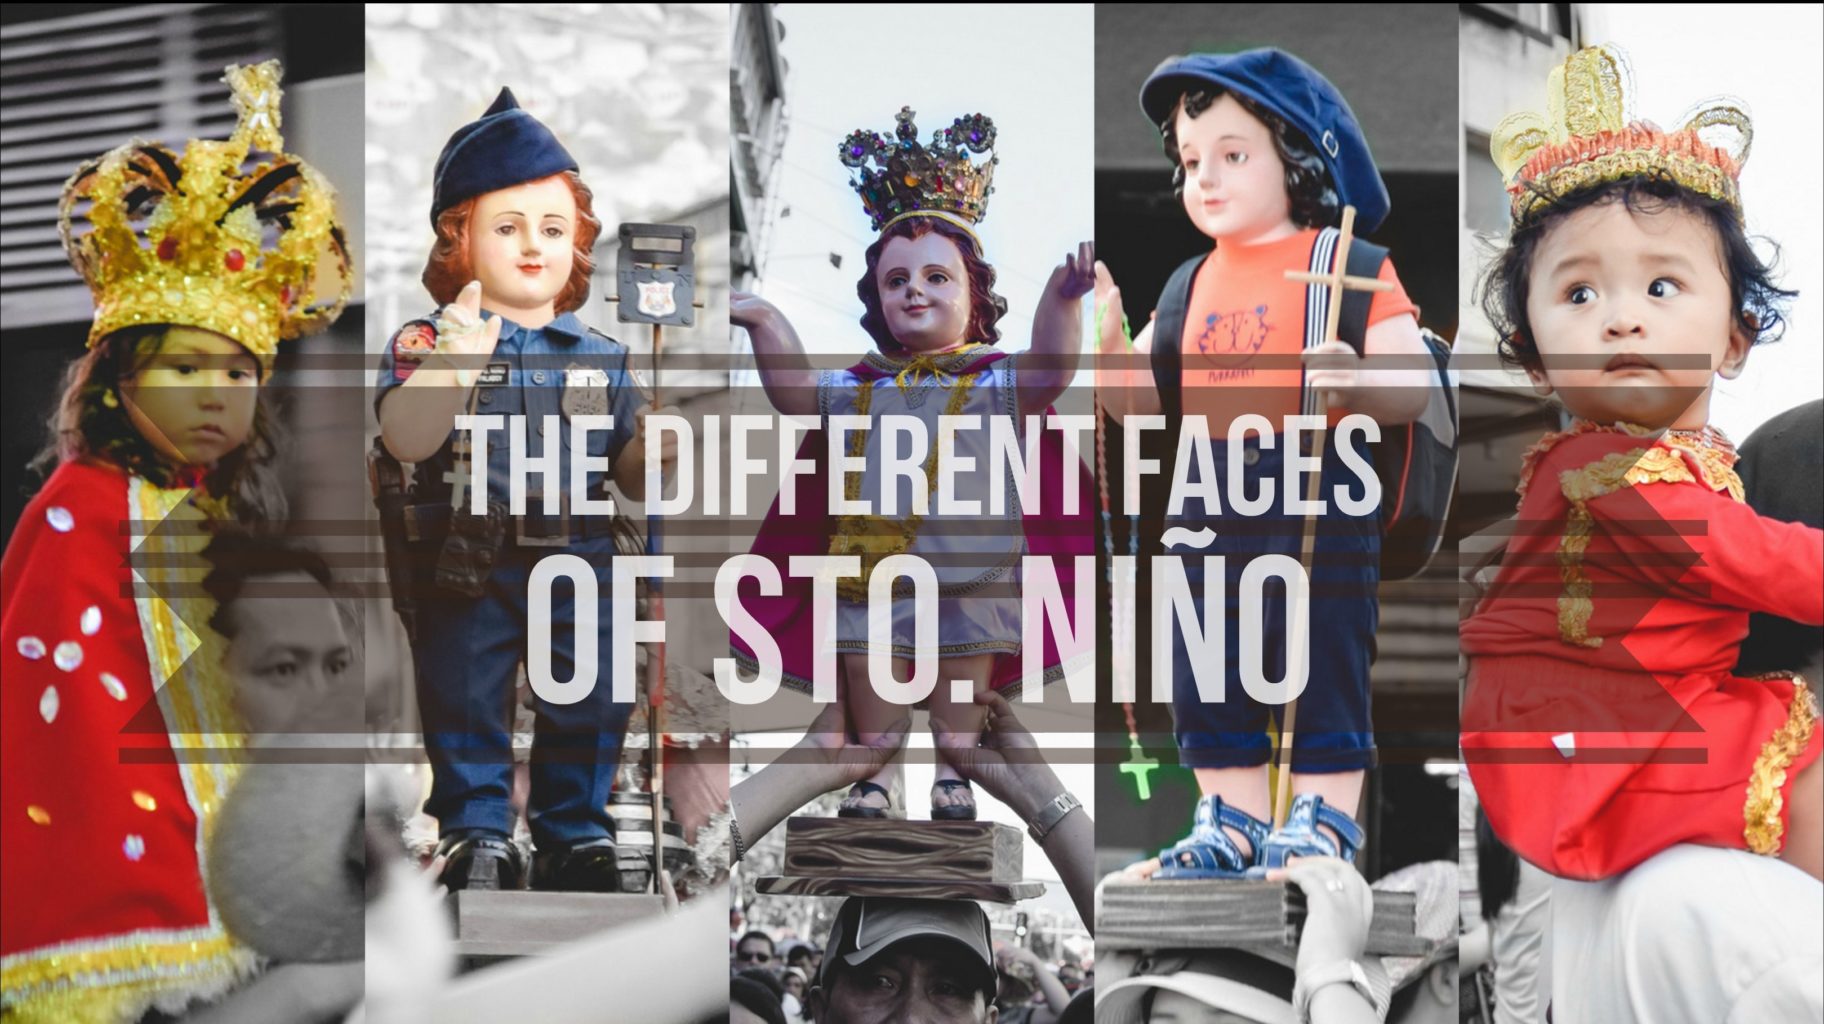 The Different Faces Of Sto. Niño You’ll See On Solemn Procession